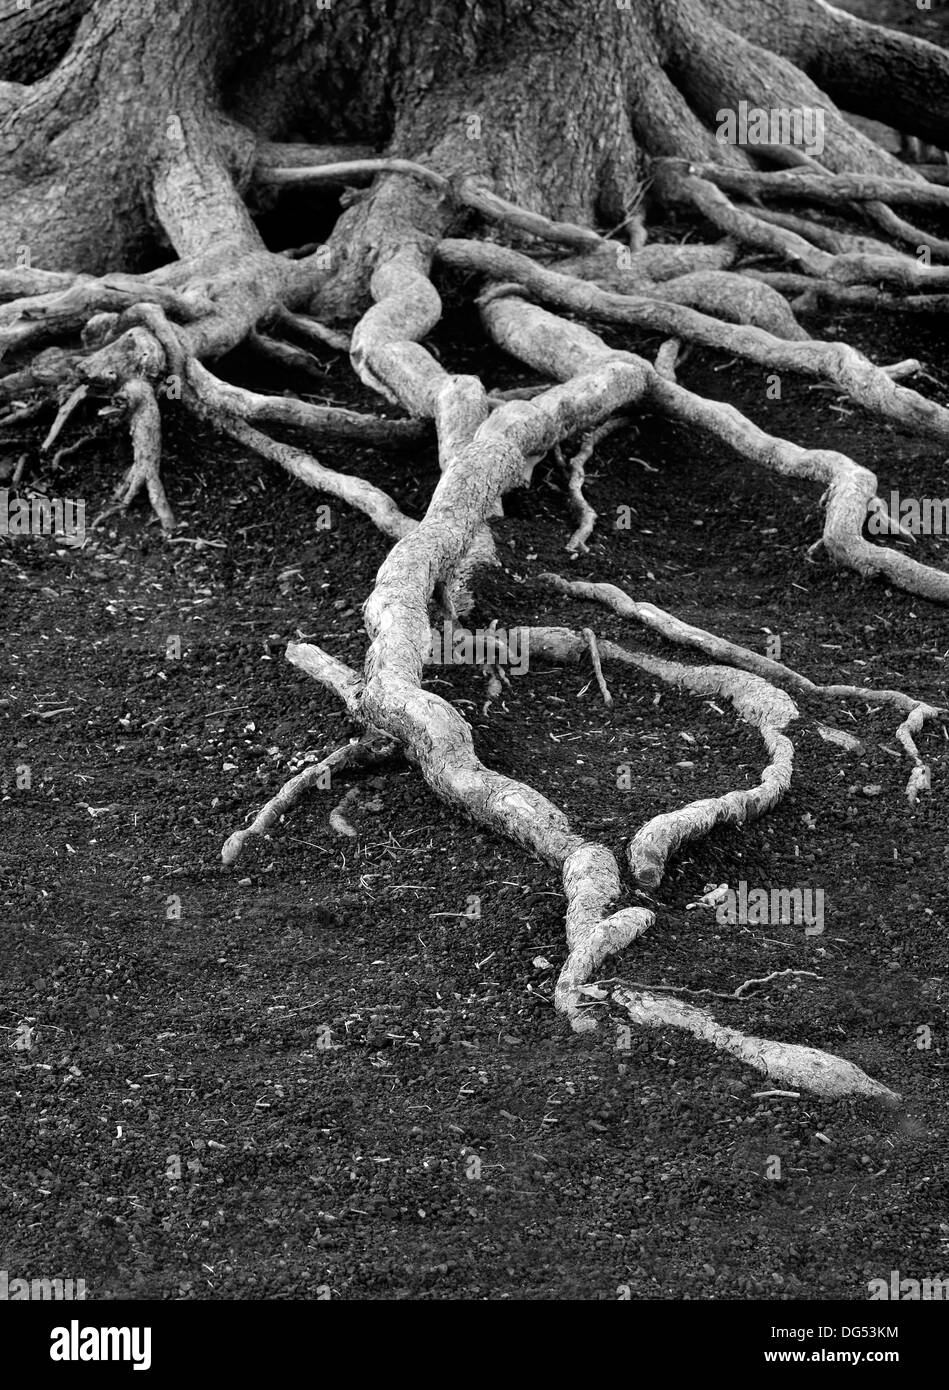 Roots from old pine trees snaking across the ground Stock Photo